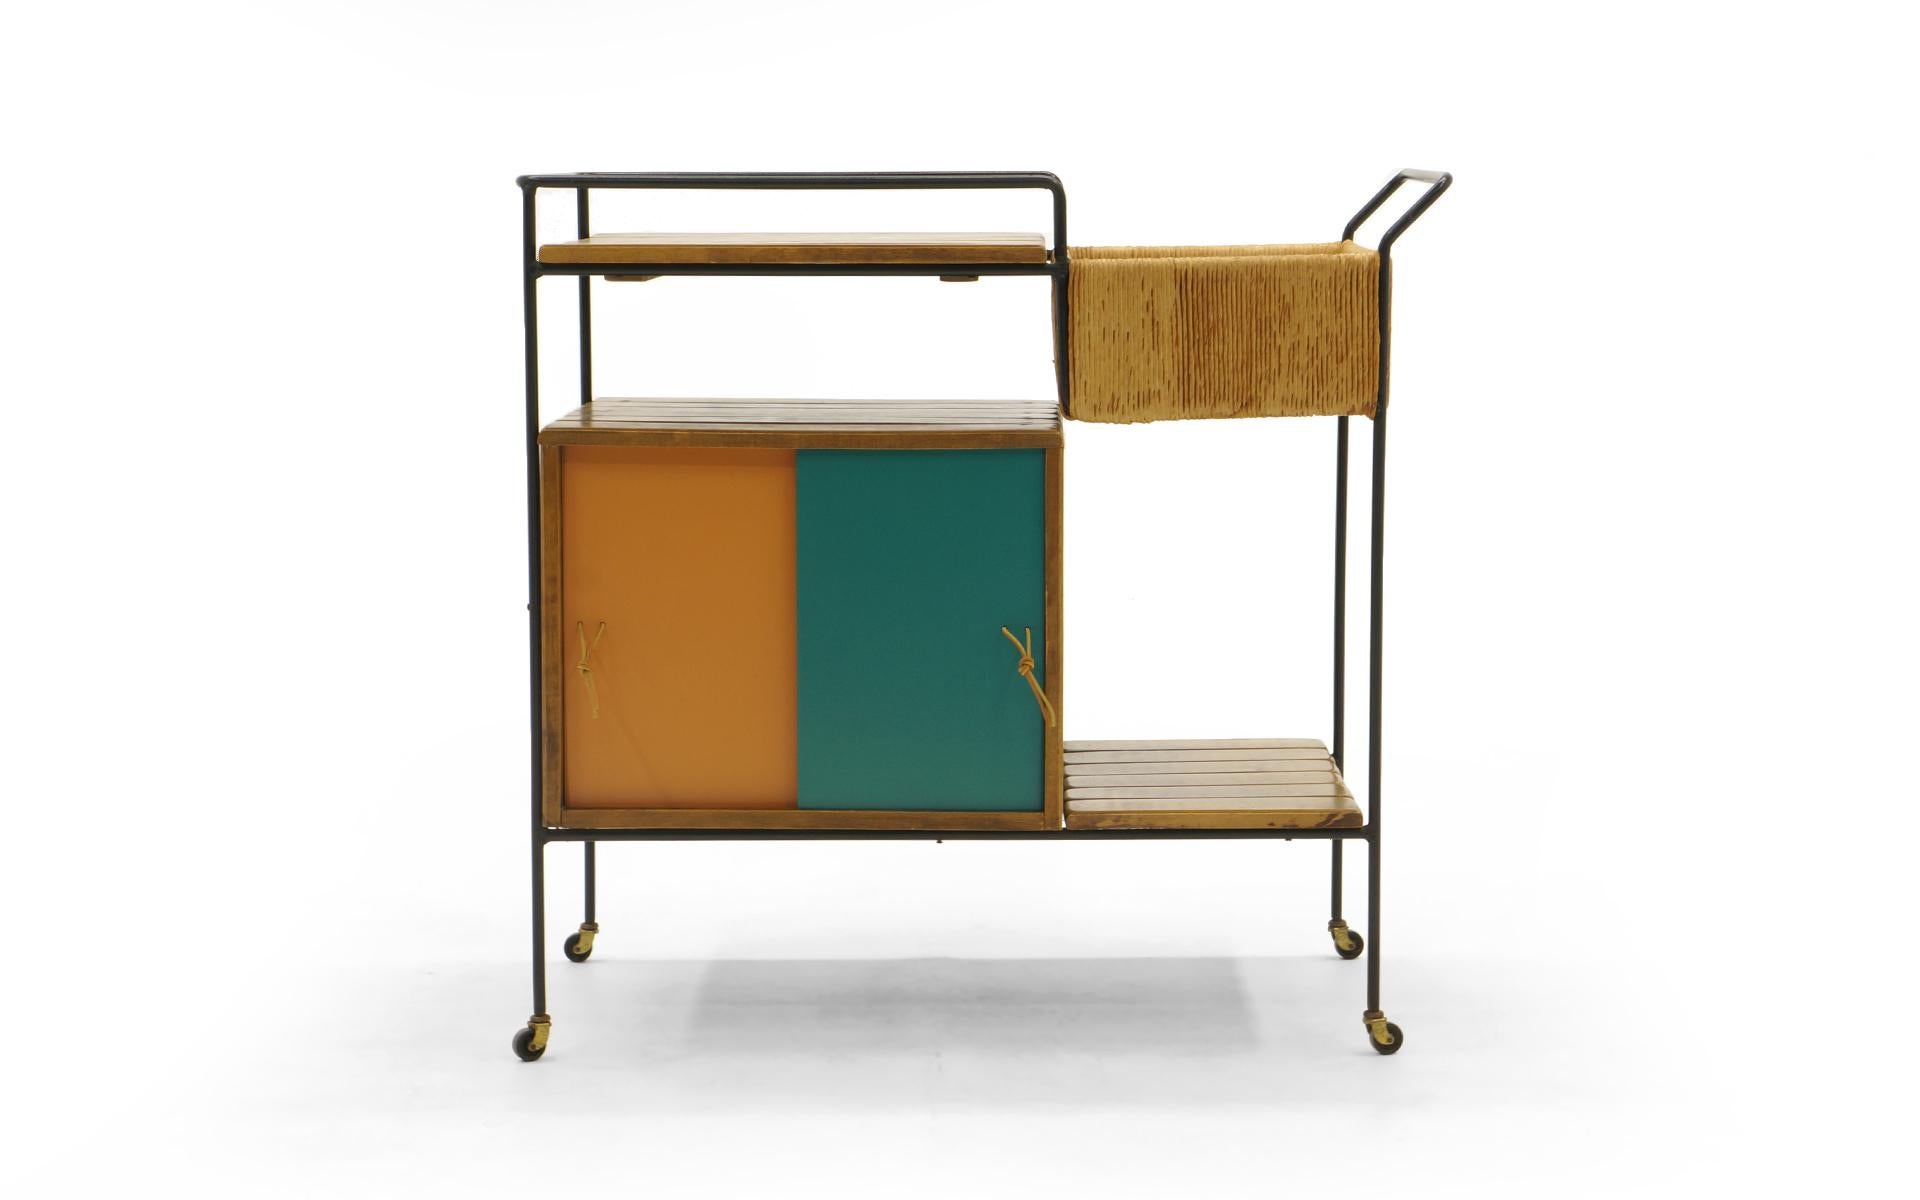 Bar Trolley by Arthur Umanoff. The sliding Masonite doors also have a white and blue side. This is a Fine example in original condition with restored door panels to give is a crisp clean appearance. Also new leather string pulls.